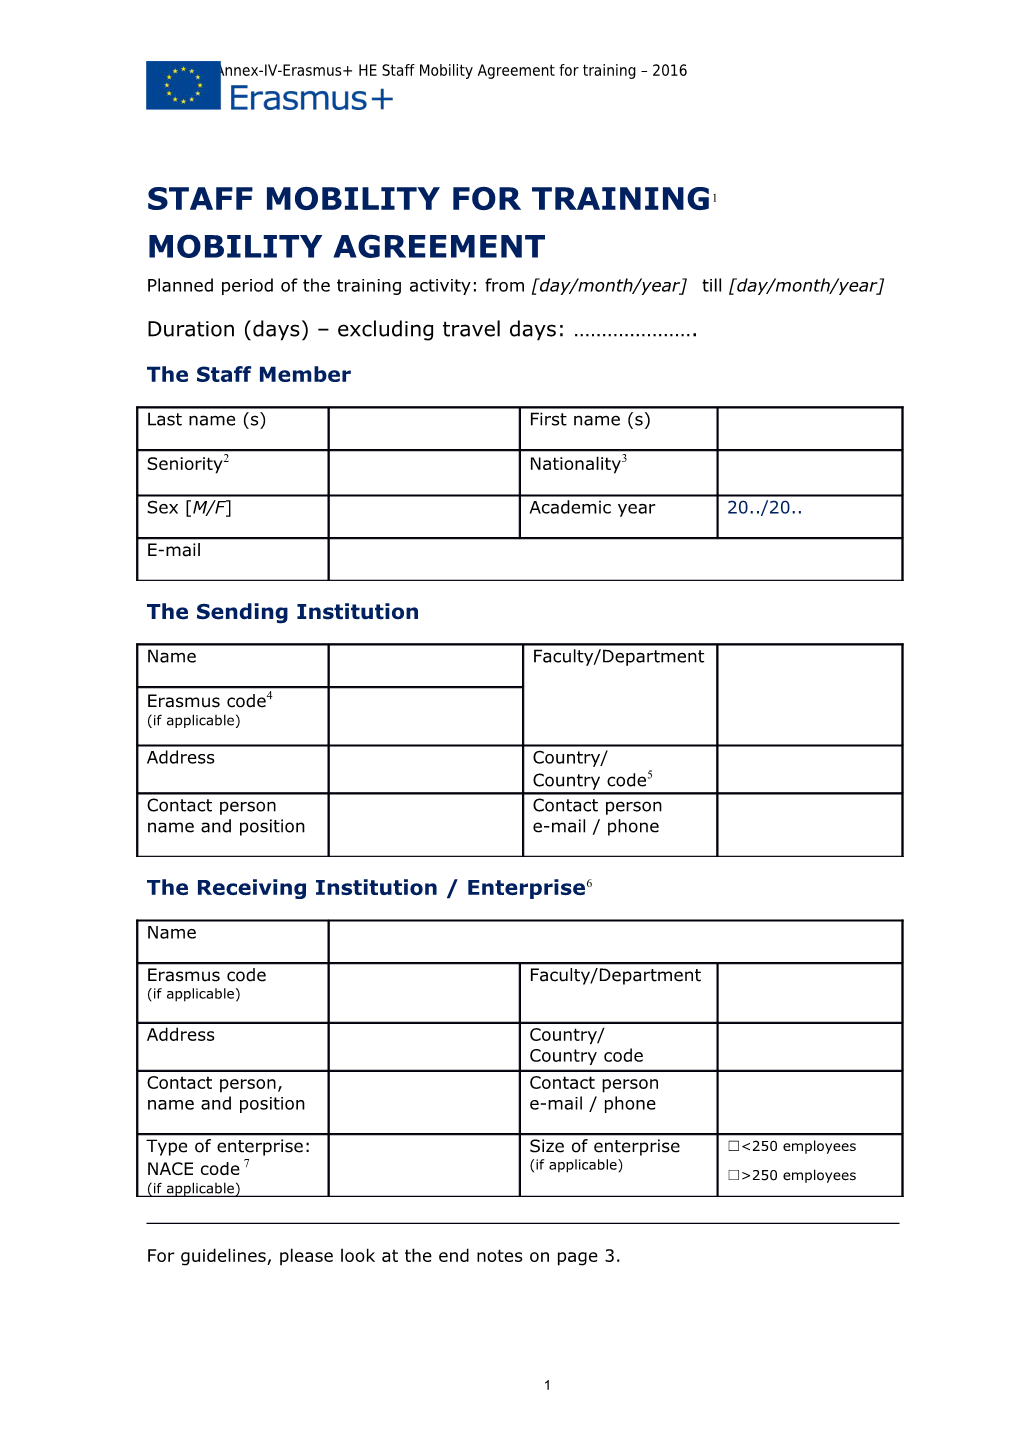 Gfna-II-C-Annex-IV-Erasmus+ HE Staff Mobility Agreement for Training 2016